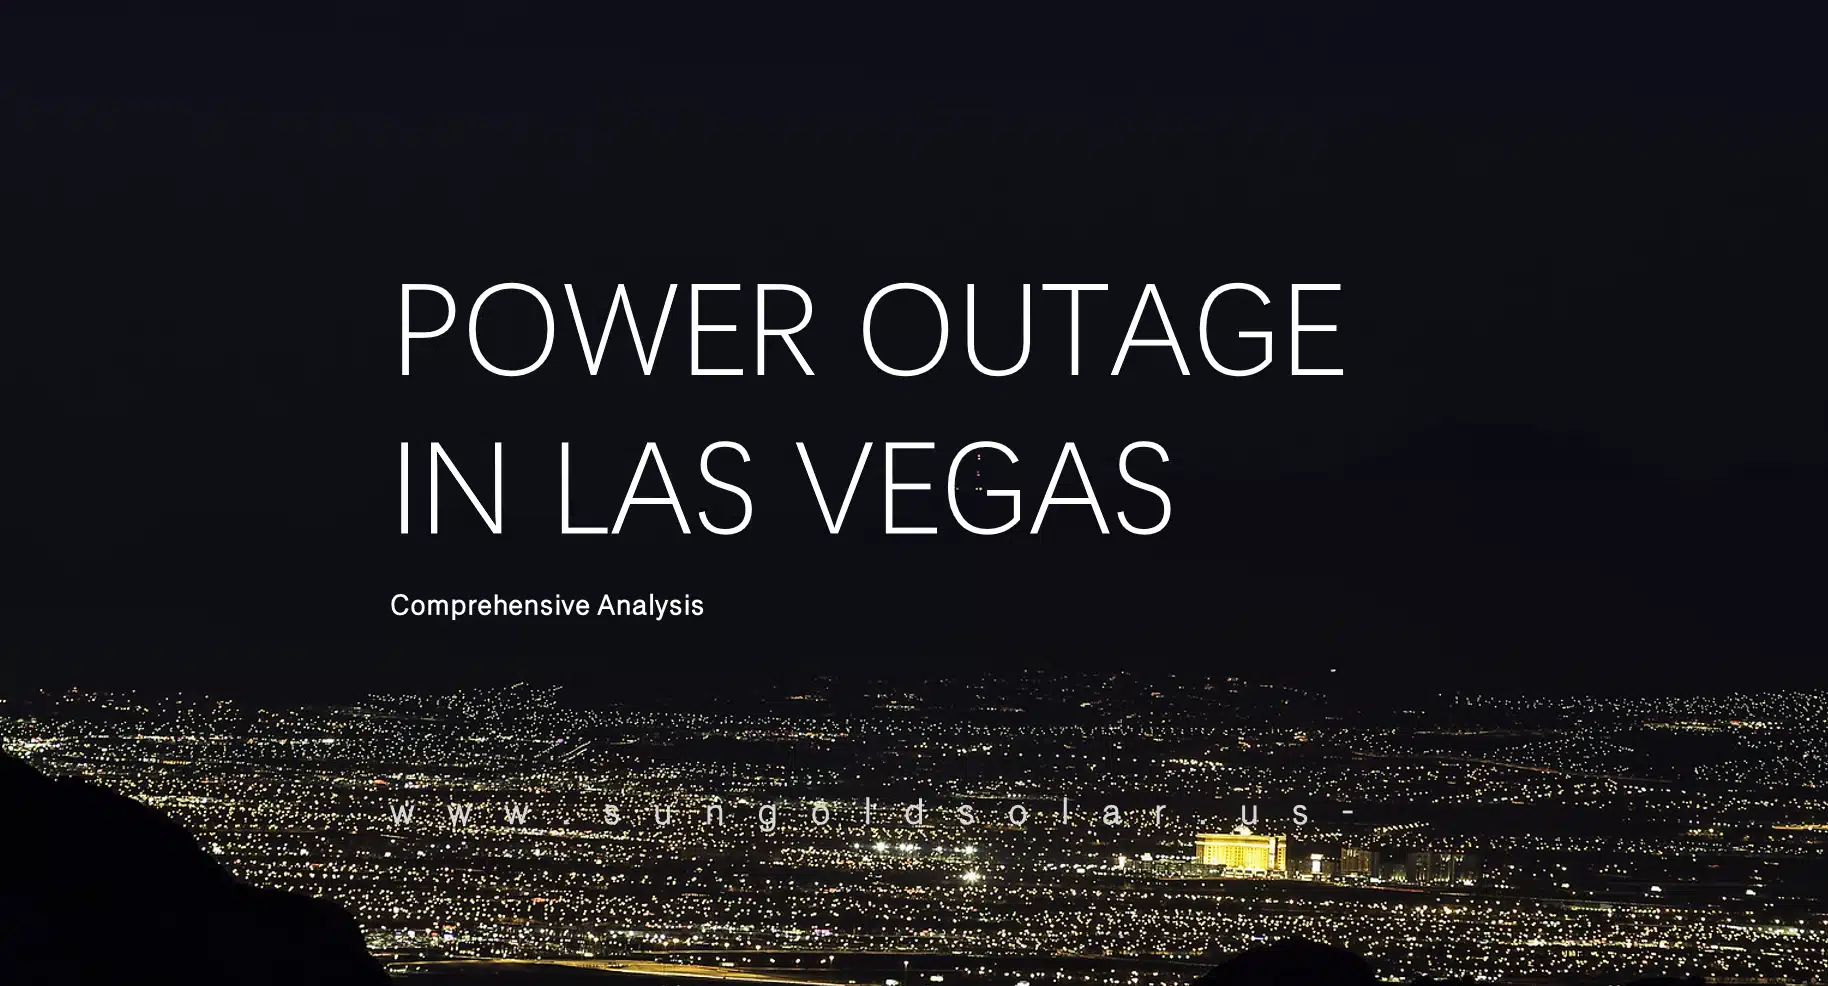 Comprehensive Analysis of the Power Outage in Las Vegas